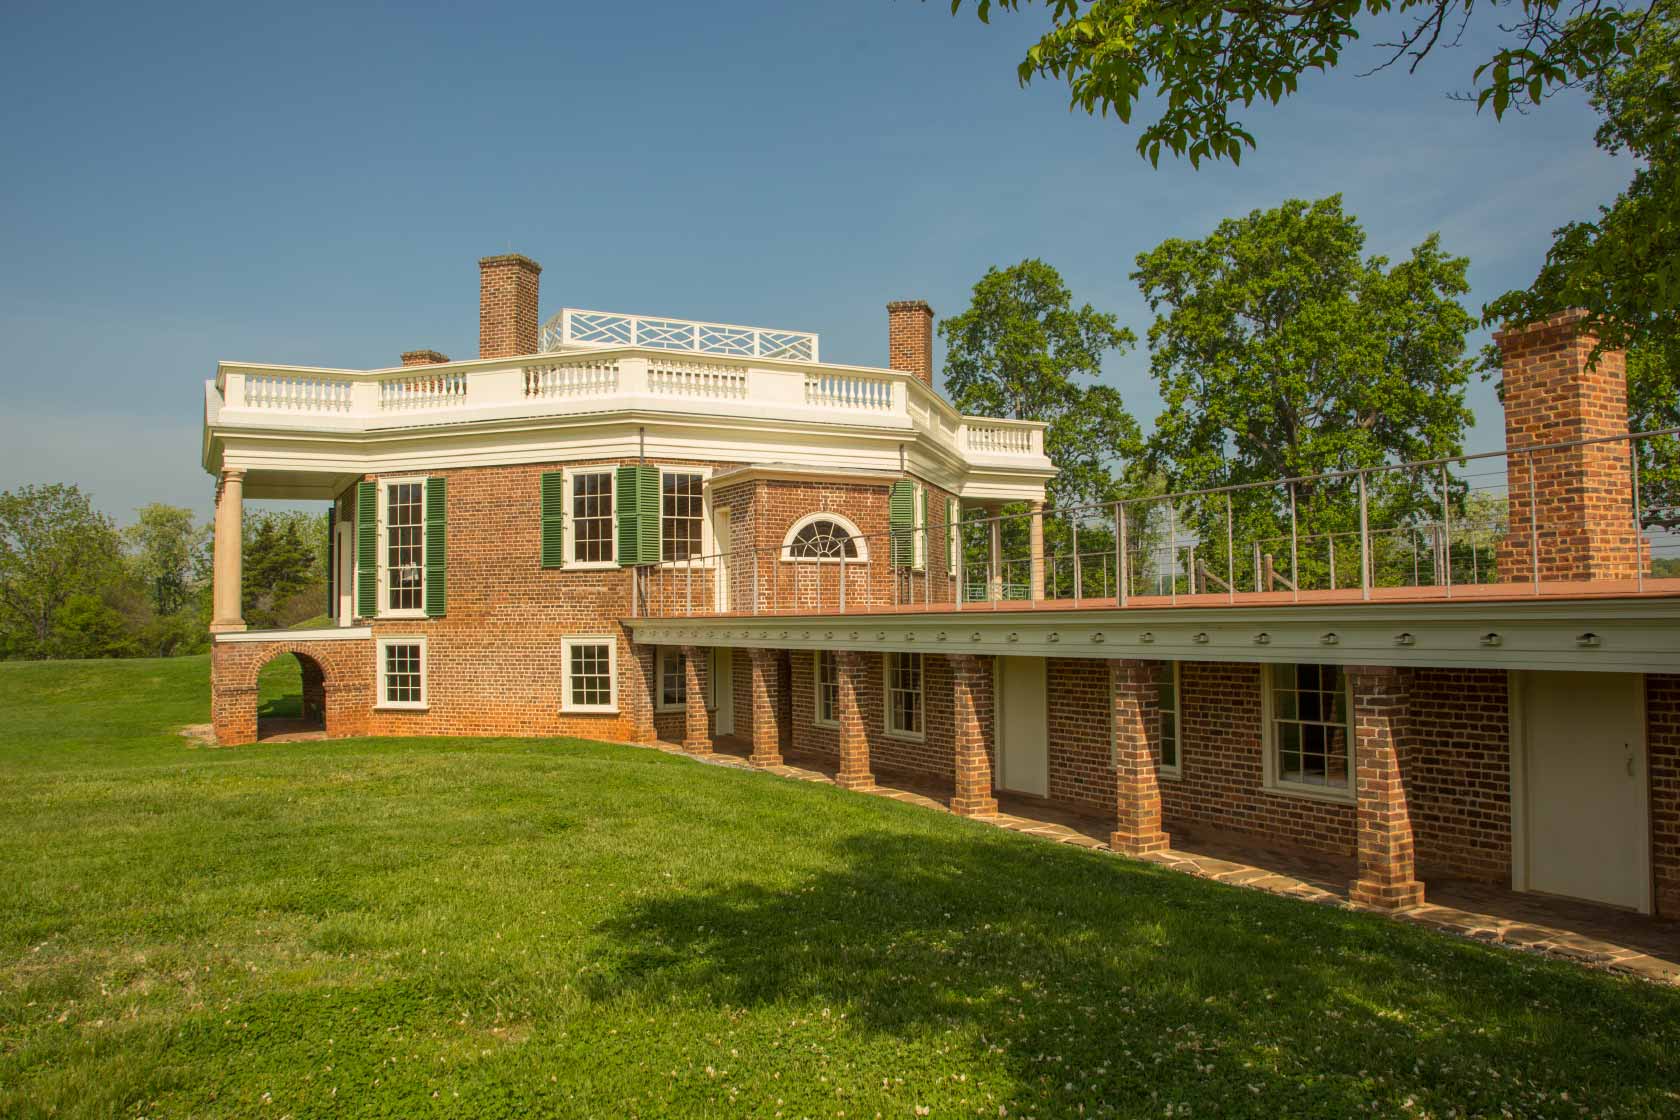 An exterior view of Poplar Forest, the retreat home of Thomas Jefferson, with the Wing of Offices in the foreground.